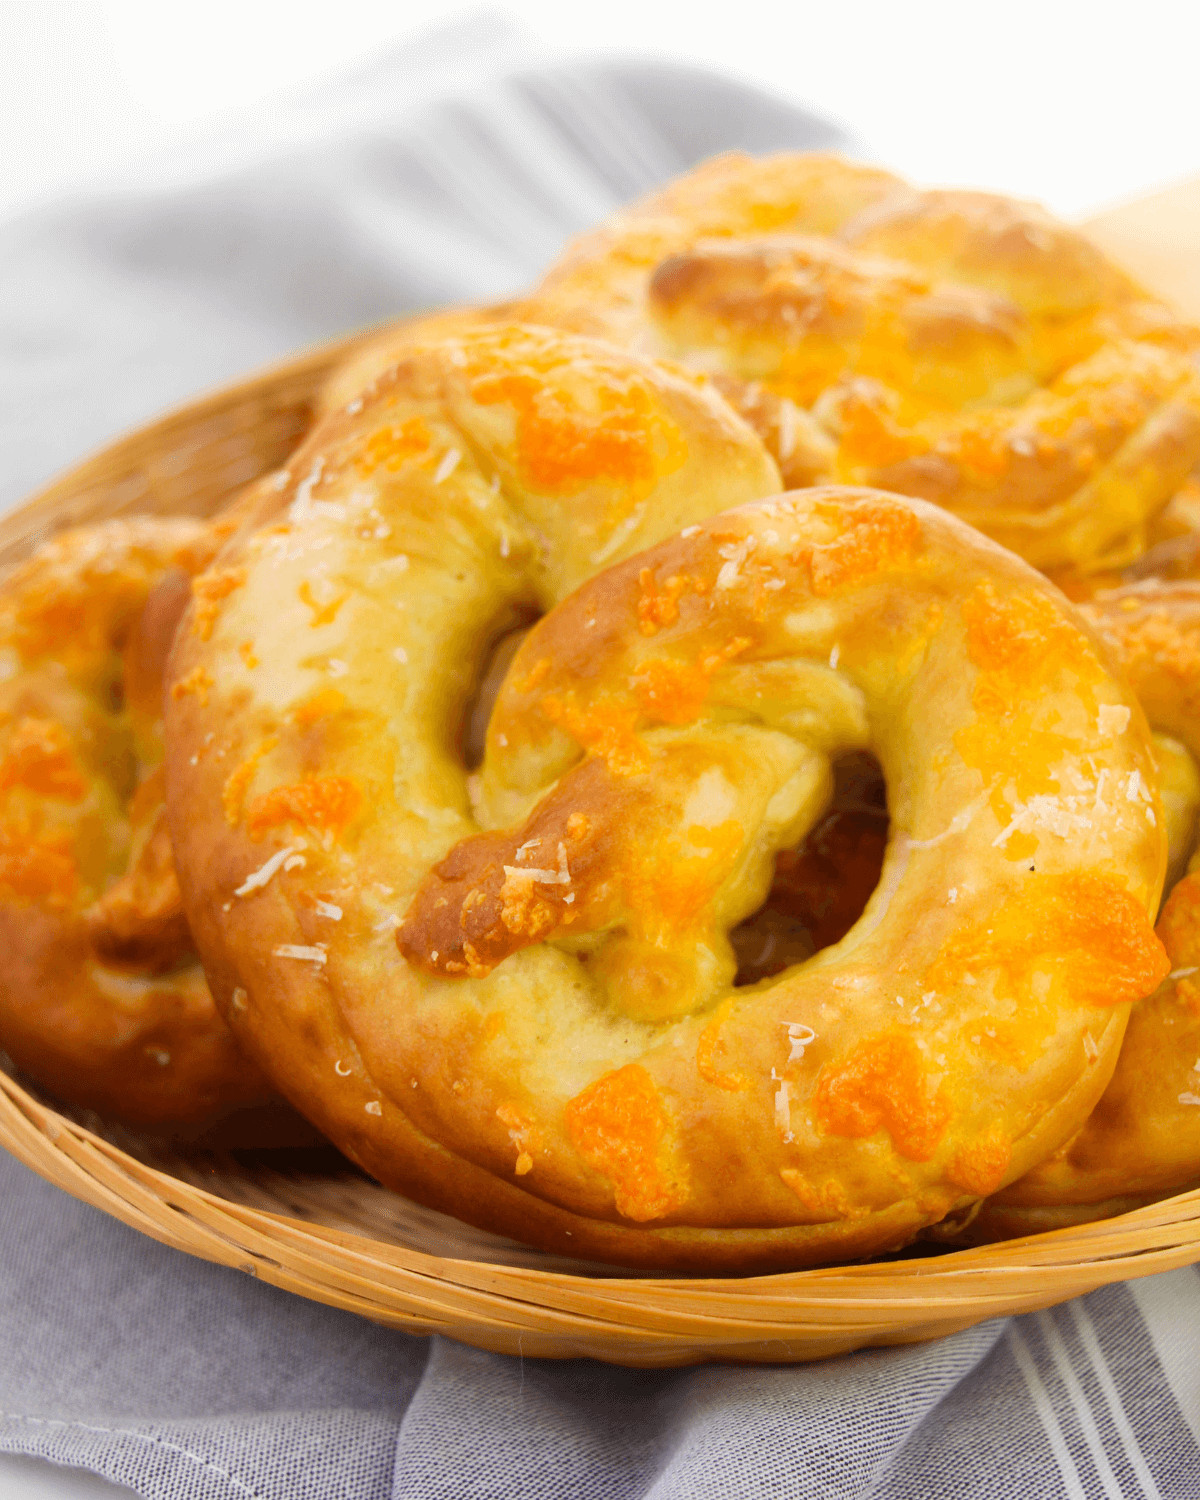 Soft pretzels with cheese stacked on a woodlen plate.